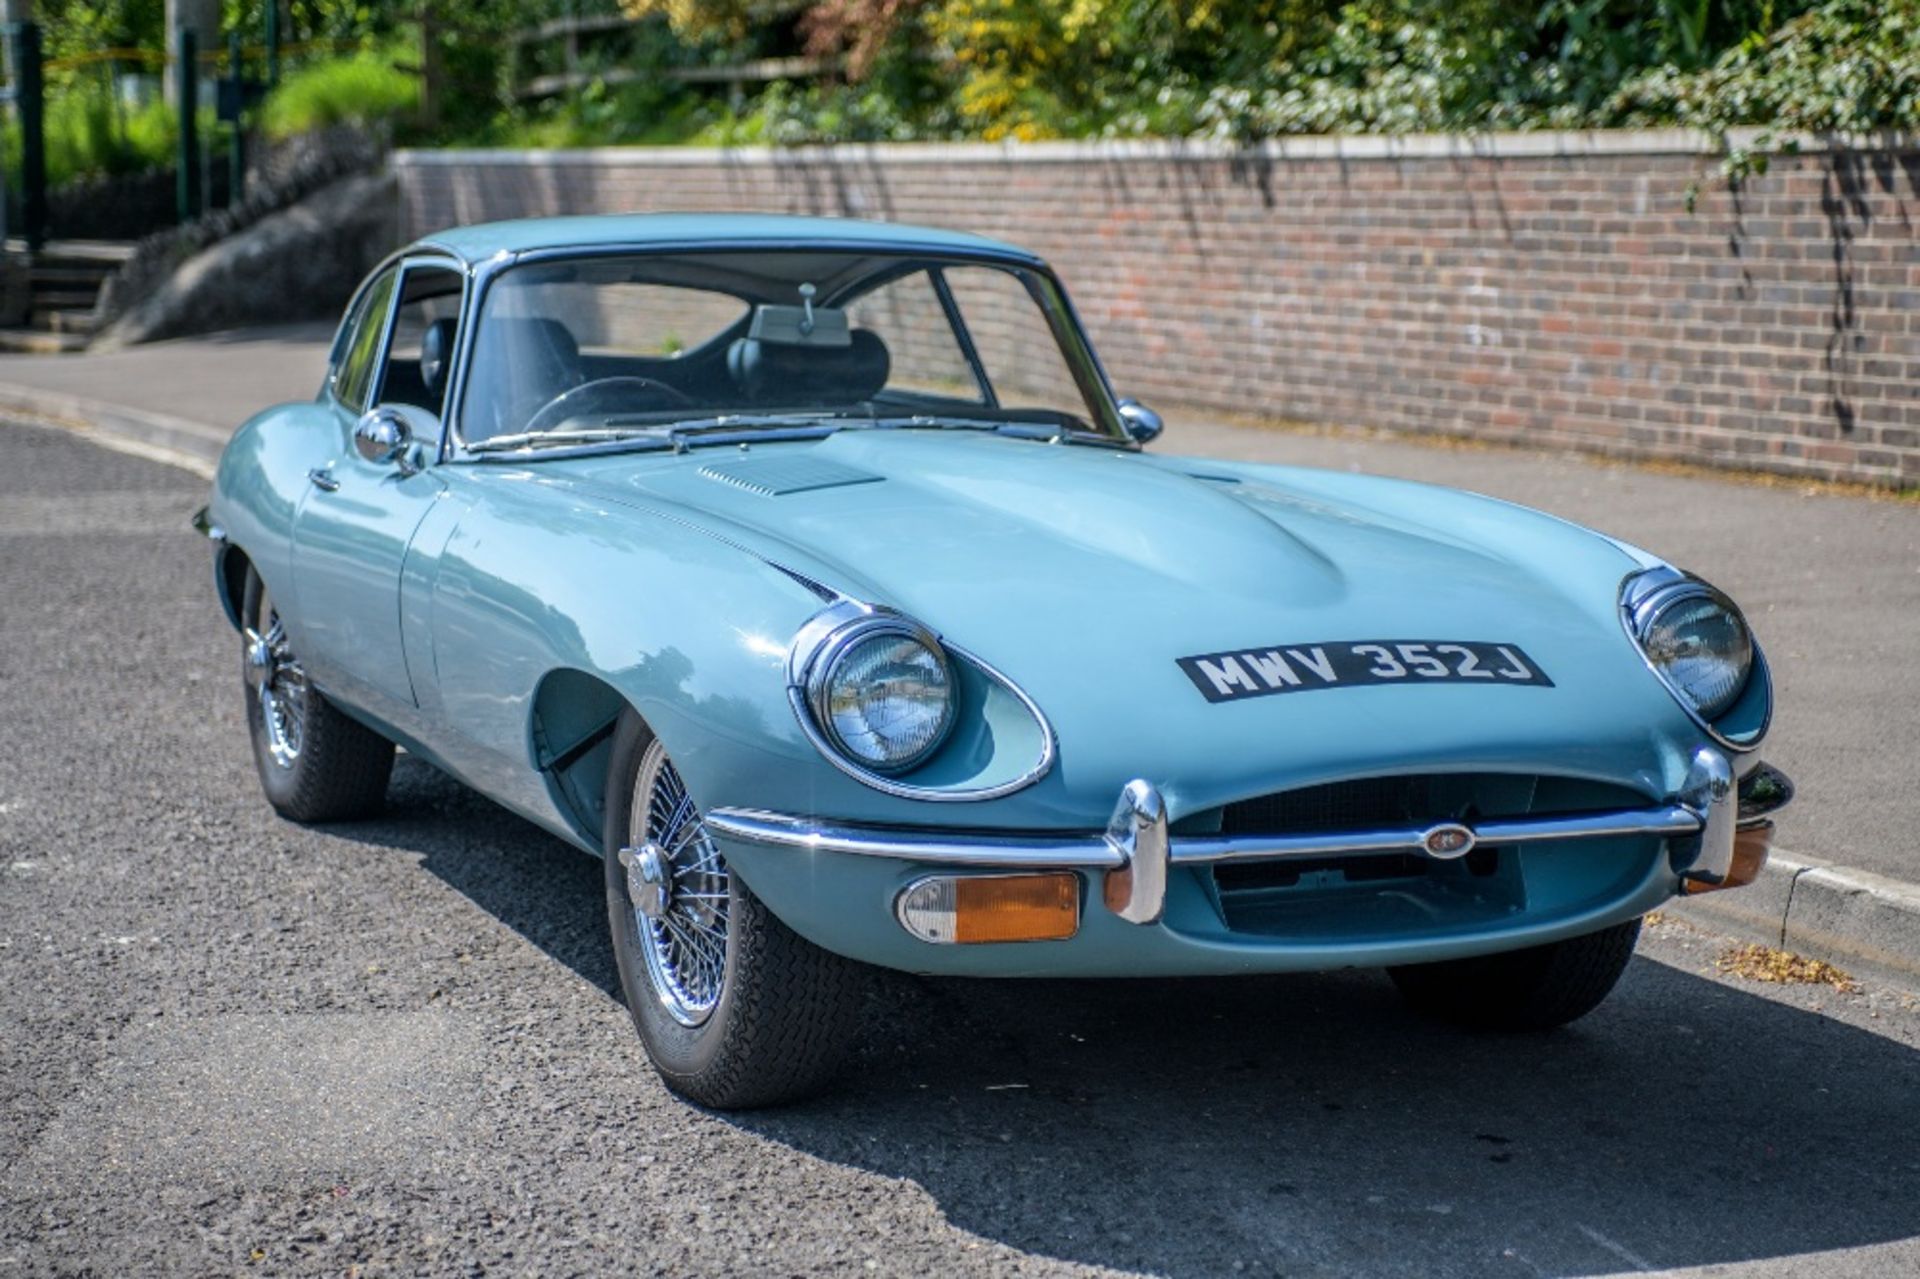 1970 JAGUAR E-TYPE SERIES II FIXED HEAD COUPE  Registration Number: MVW 352J Chassis Number: 1R20993